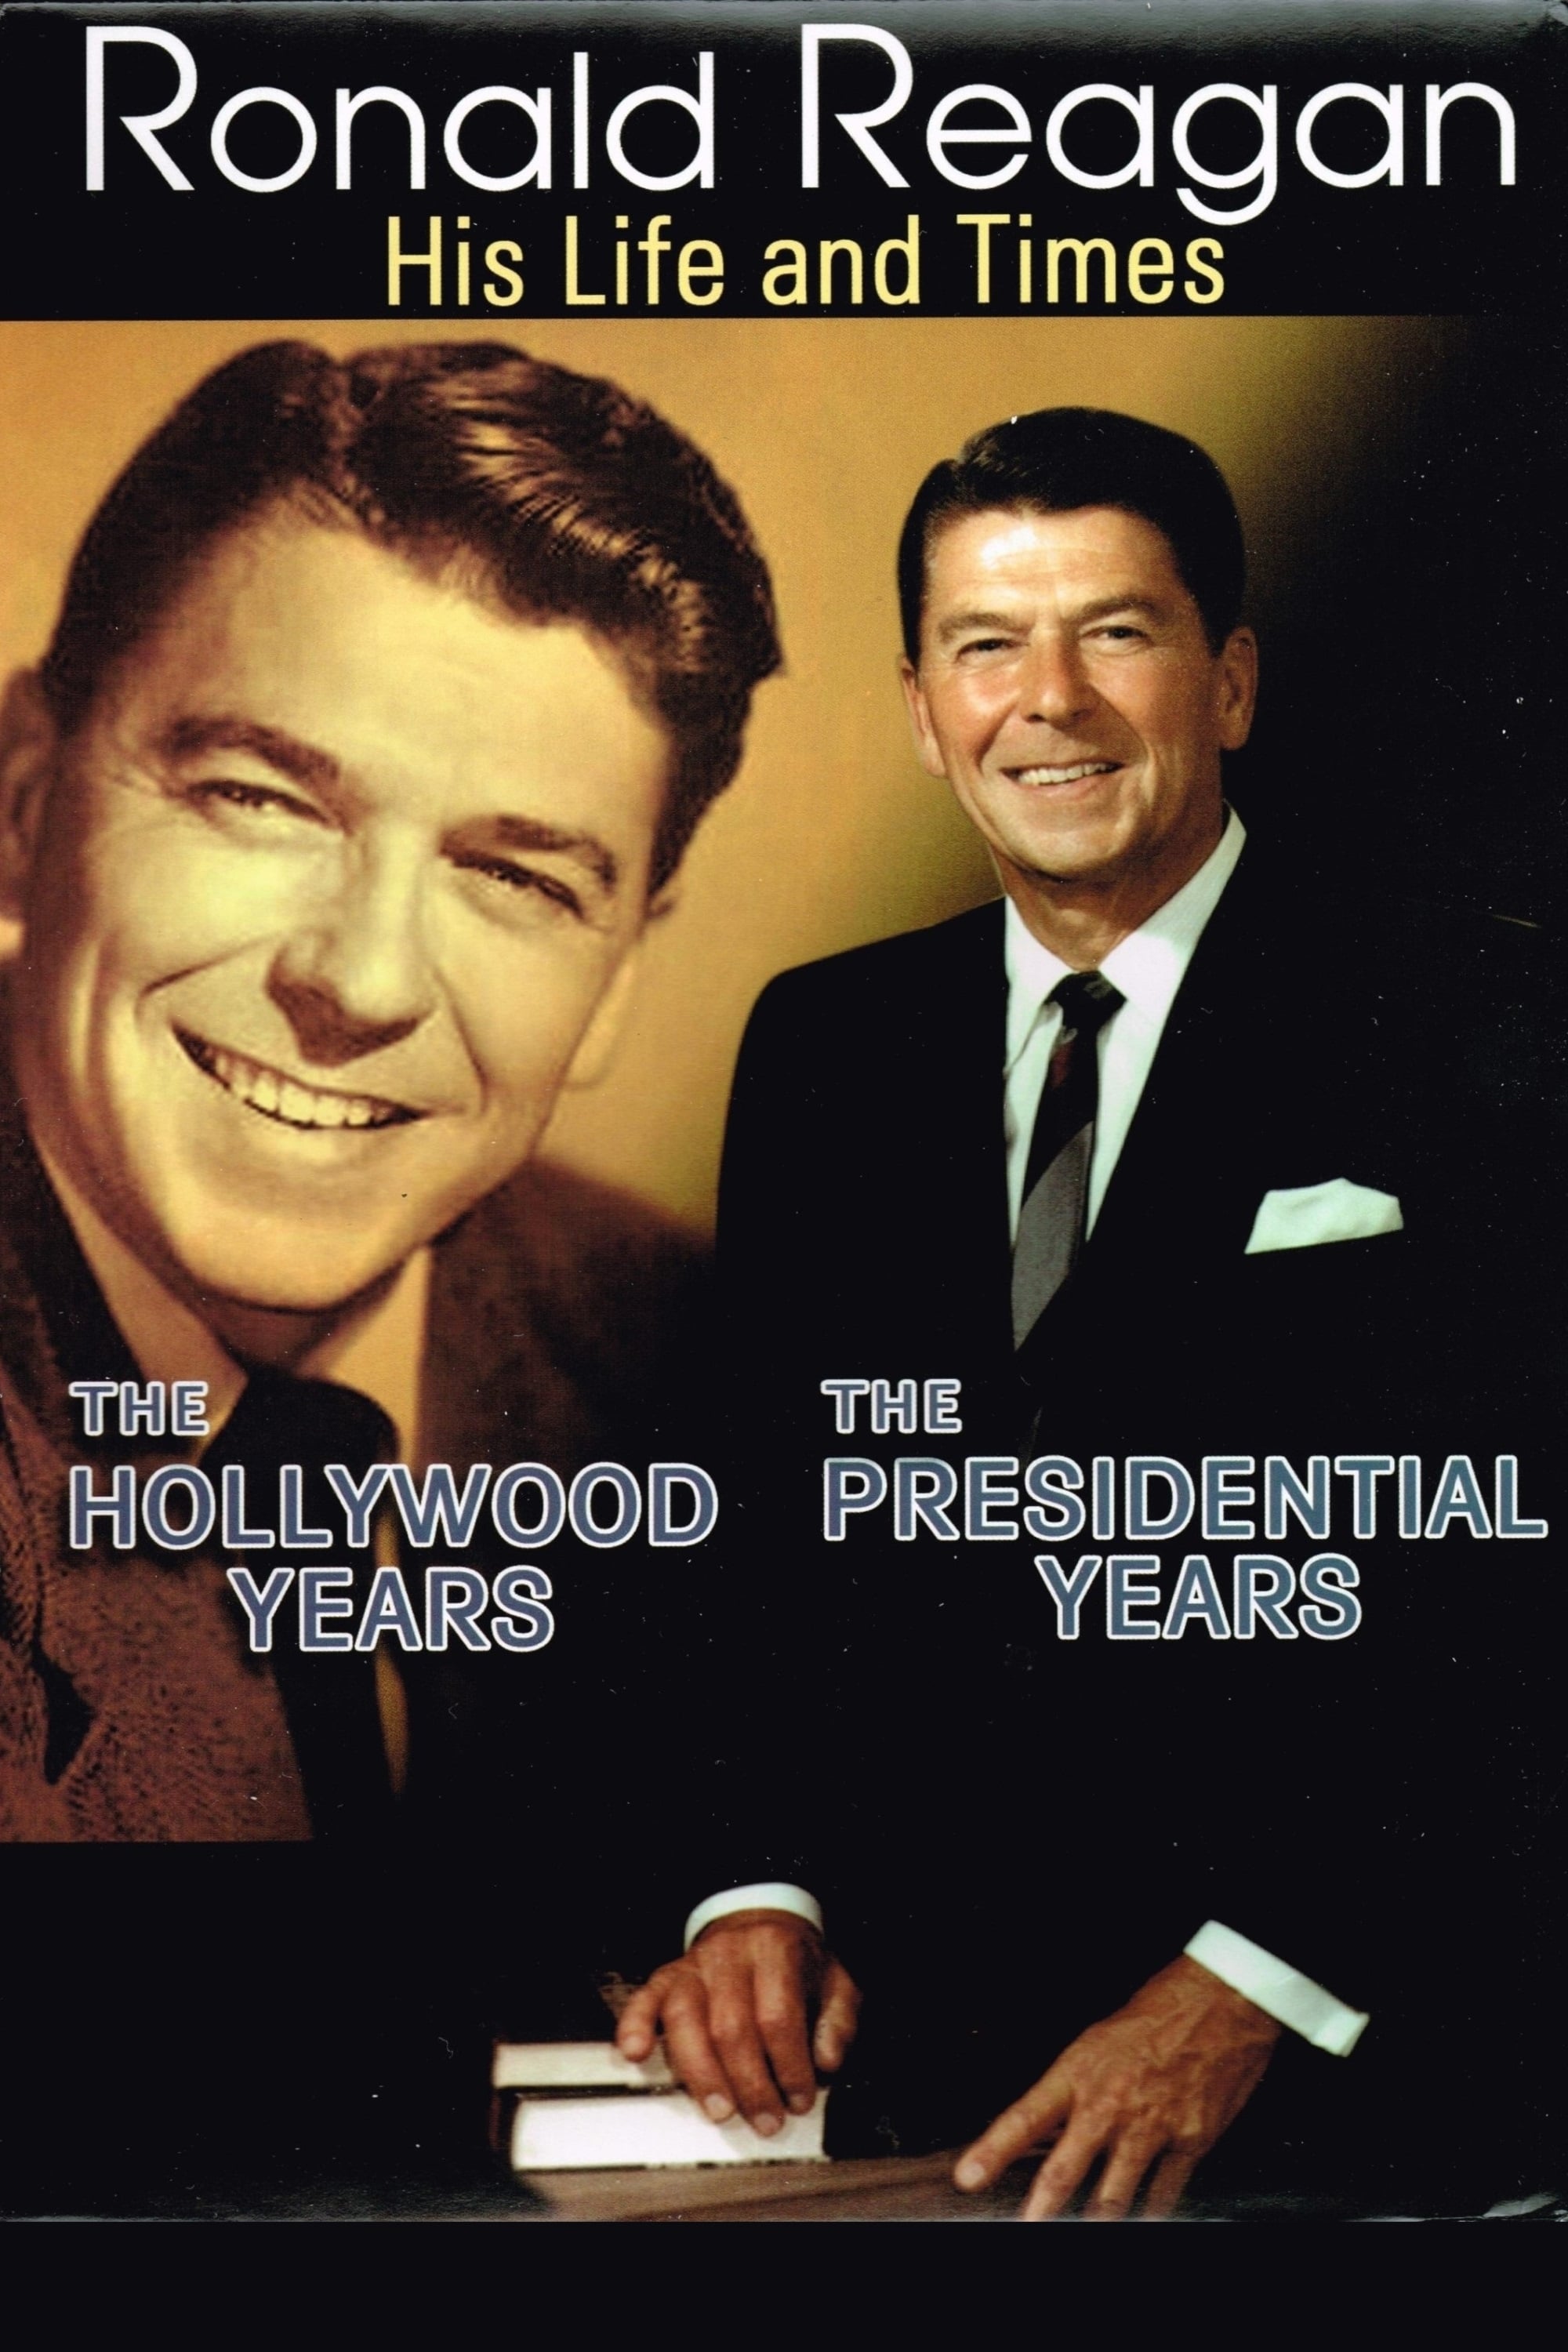 Ronald Reagan: The Hollywood Years, the Presidential Years